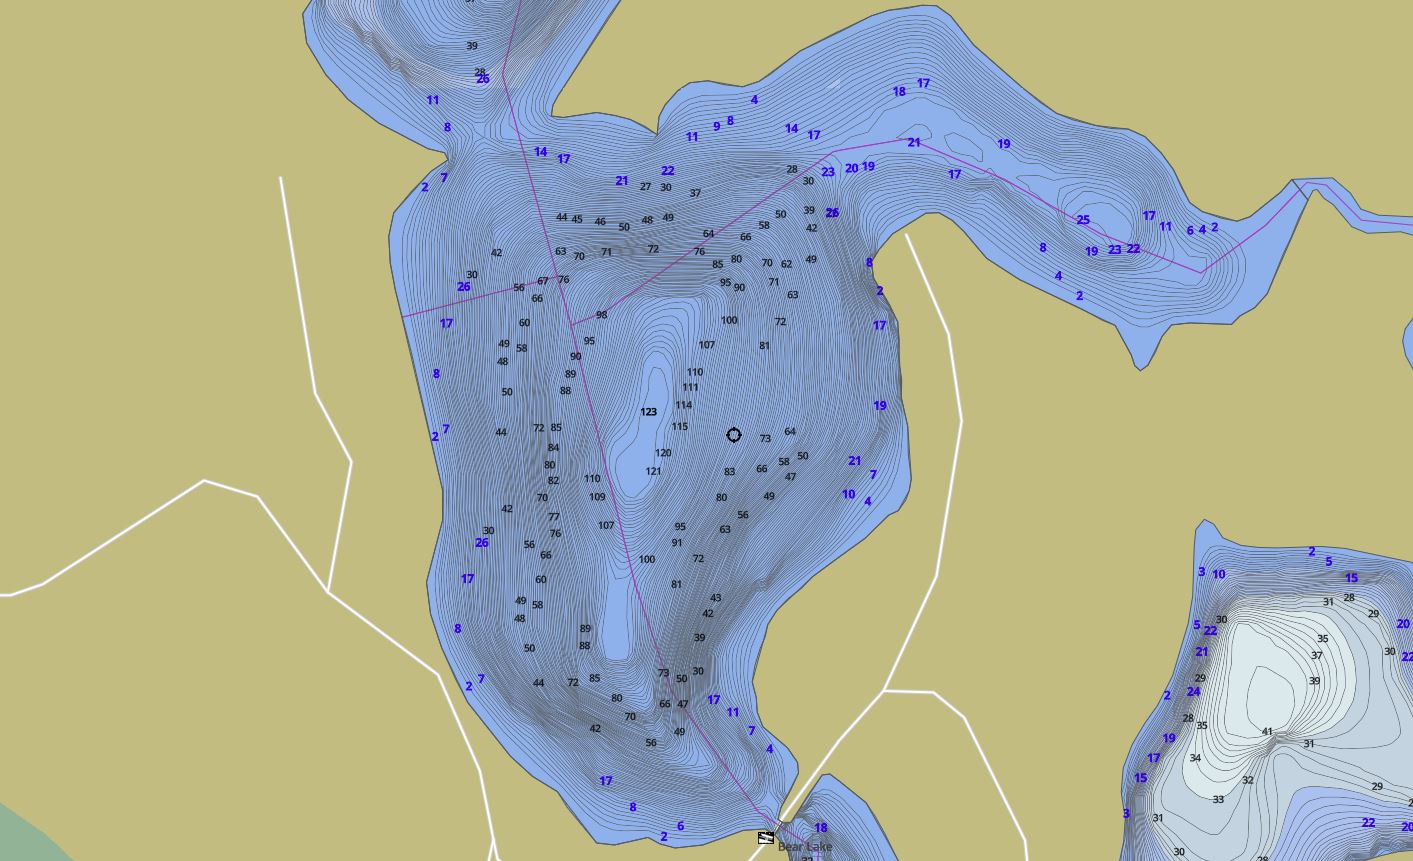 Contour Map of Bear Lake in Municipality of Algonquin Highlands and the District of Haliburton